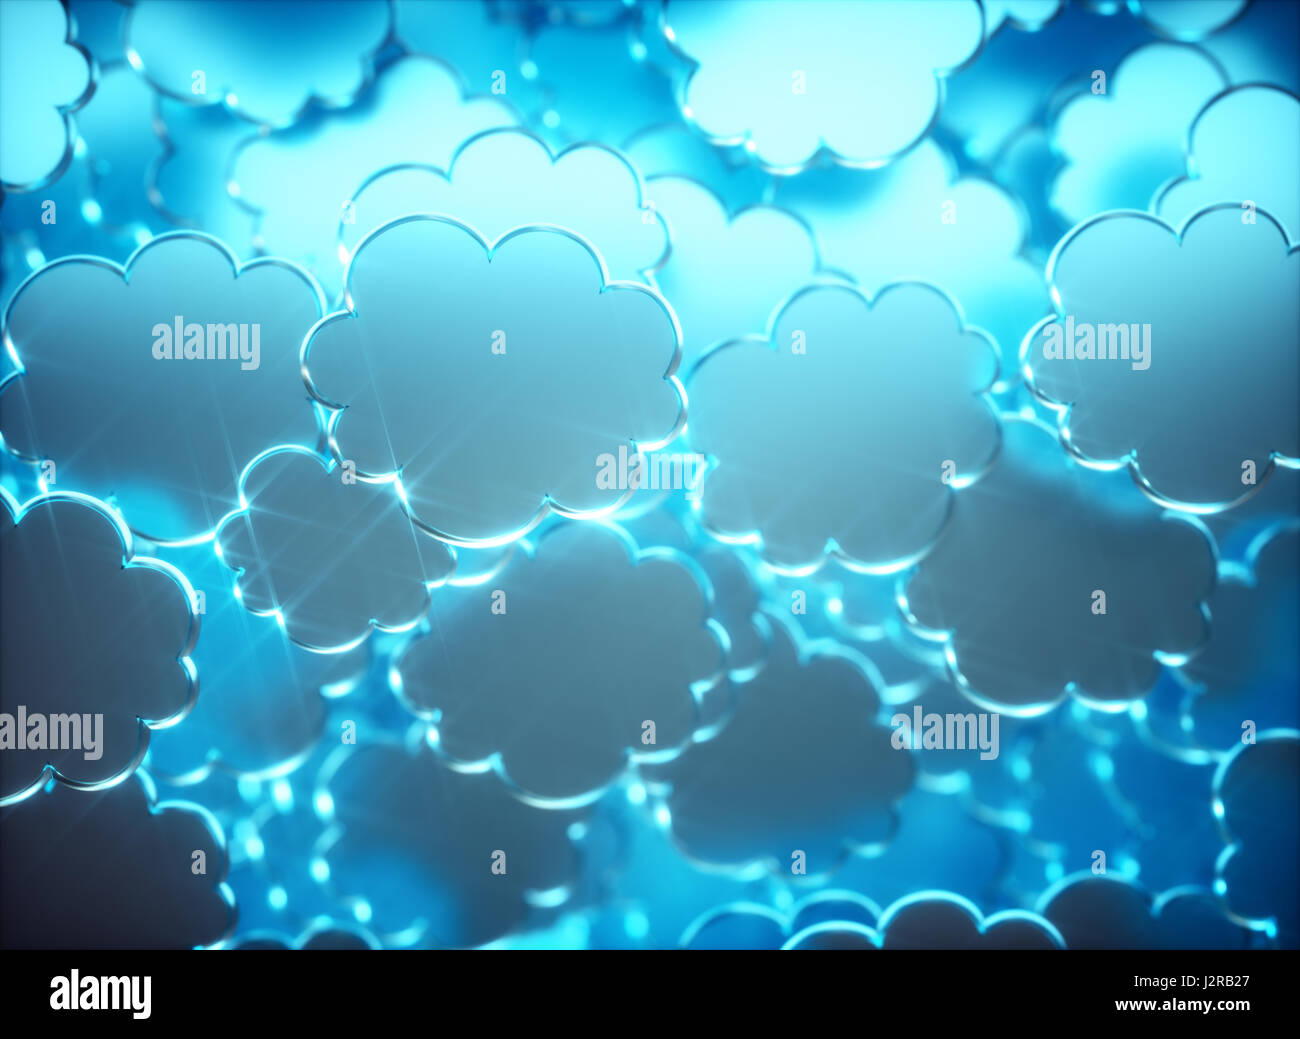 3D illustration. Background image with metallic cloud balloons. Image with depth of field. Stock Photo